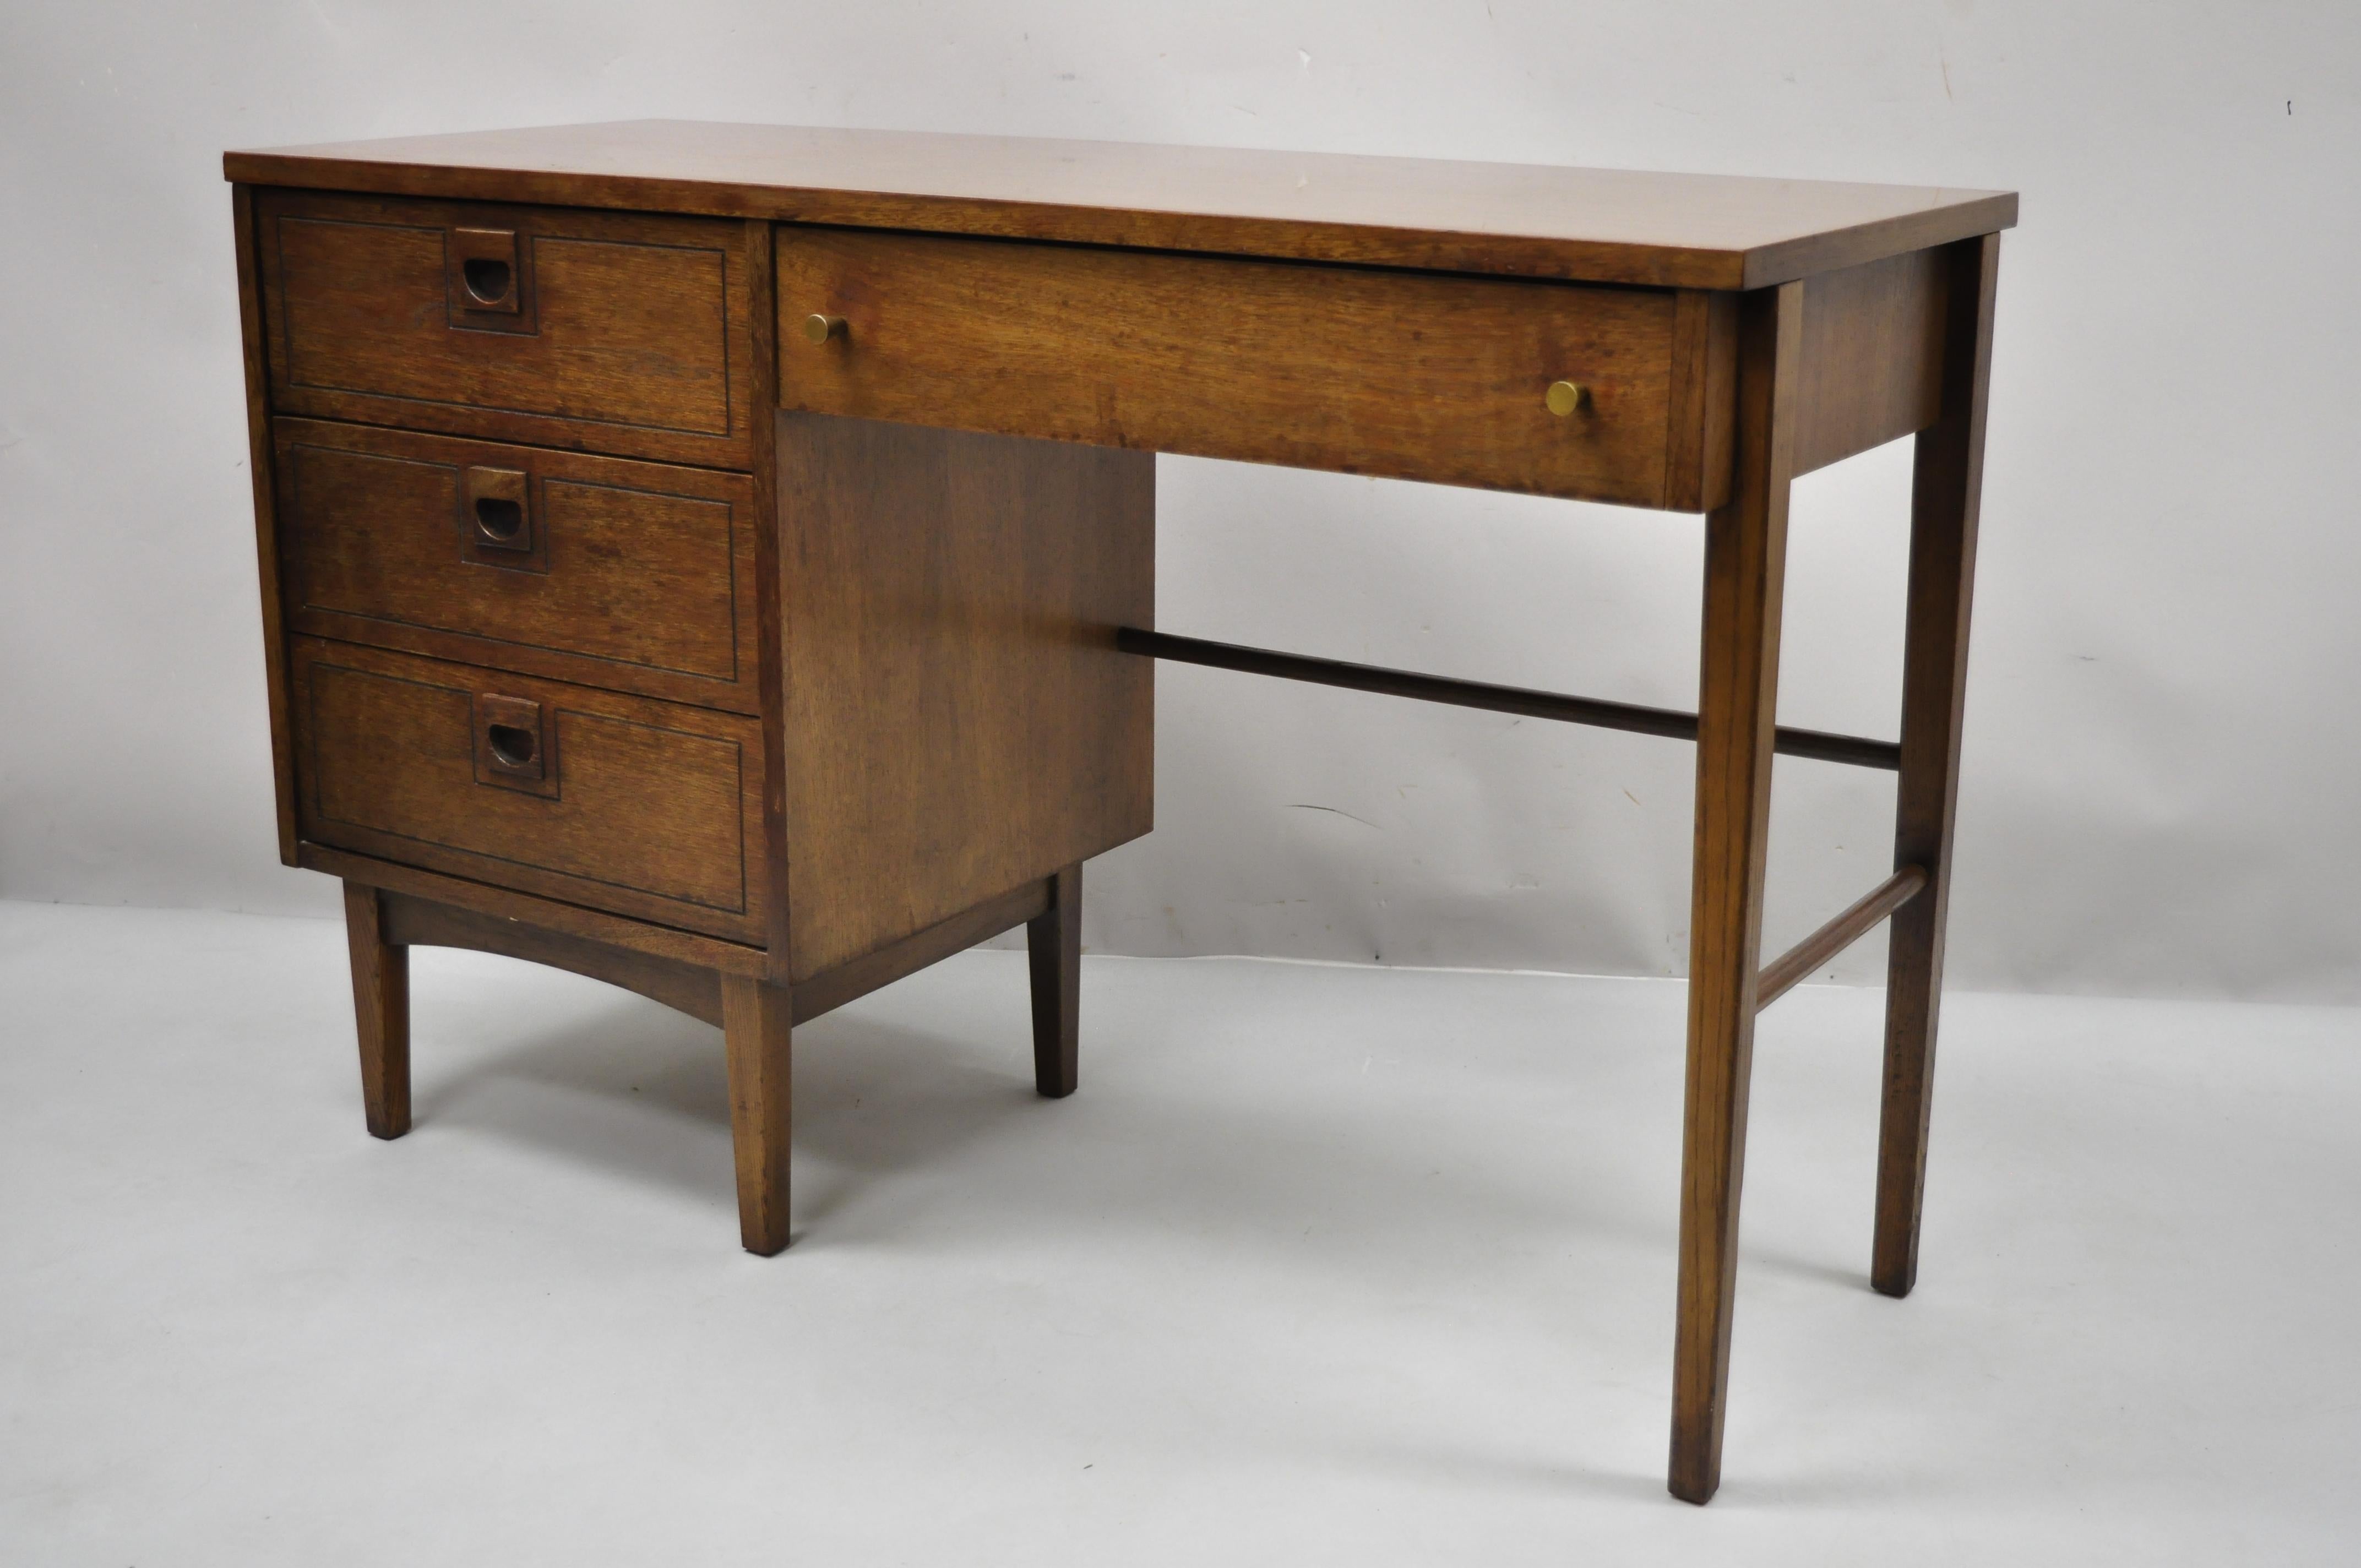 Stanley Mid-Century Modern walnut and Formica writing kneehole work desk. Item features wood grain formica top, sculpted wood and brass pulls, beautiful wood grain, 4 drawers, clean modernist lines, quality craftsmanship. Circa Mid 20th Century.